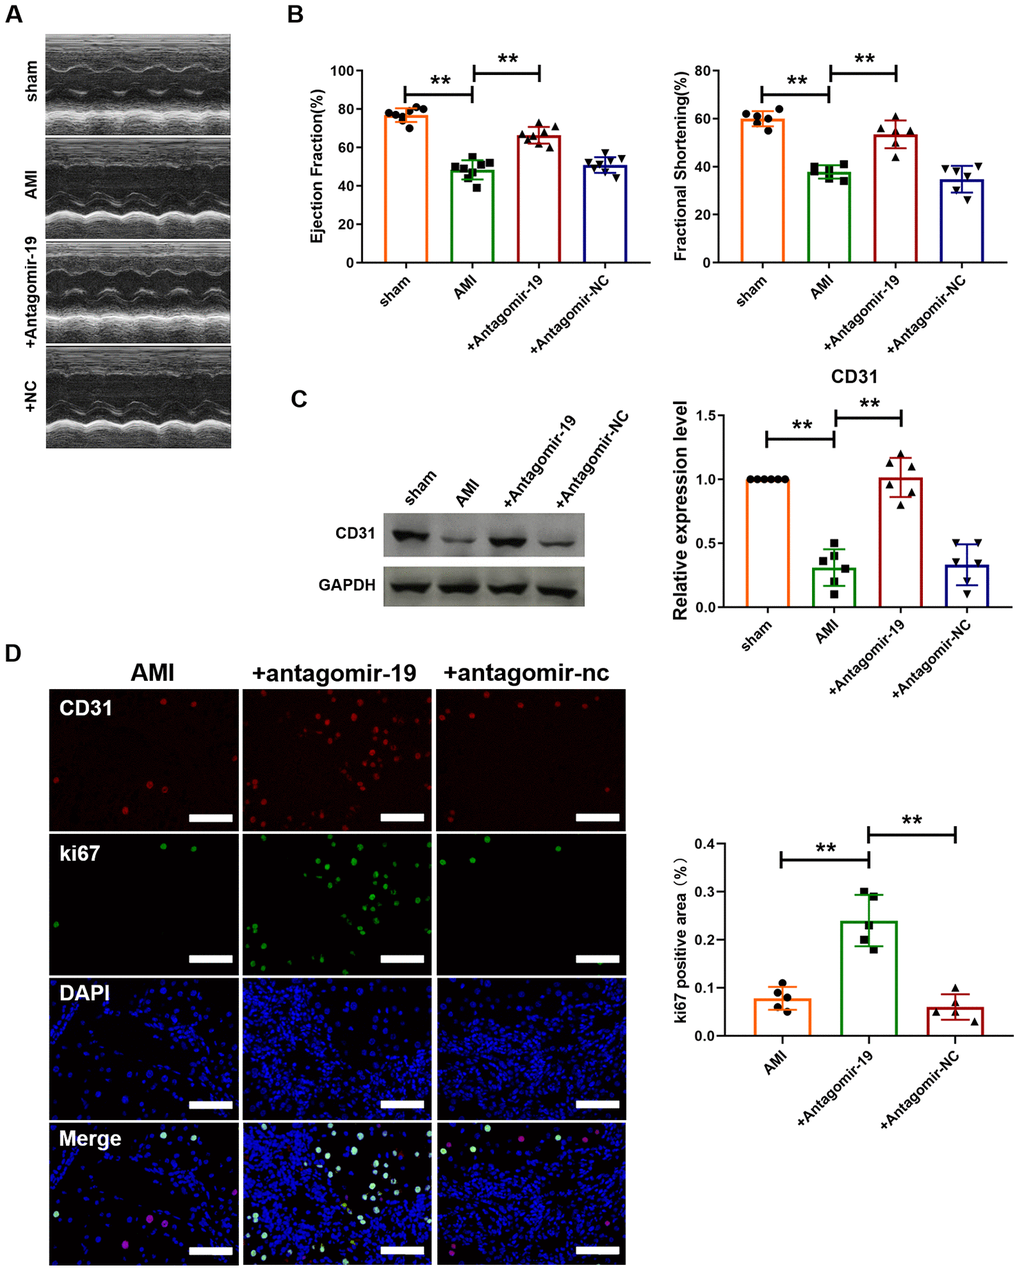 Inhibition of miR-19a-3p promotes angiogenesis and improves heart function in mice with MI. (A) Representative echocardiographic assessment images of heart function of mice with MI. (B) Ejection fractions (EF%) and fractional shortening (%). (C) Western blot analysis of expression level of CD31 in left ventricle of mice. (D) Immunofluorescence staining of ki67 in peri-infarct area of left ventricle. **P 